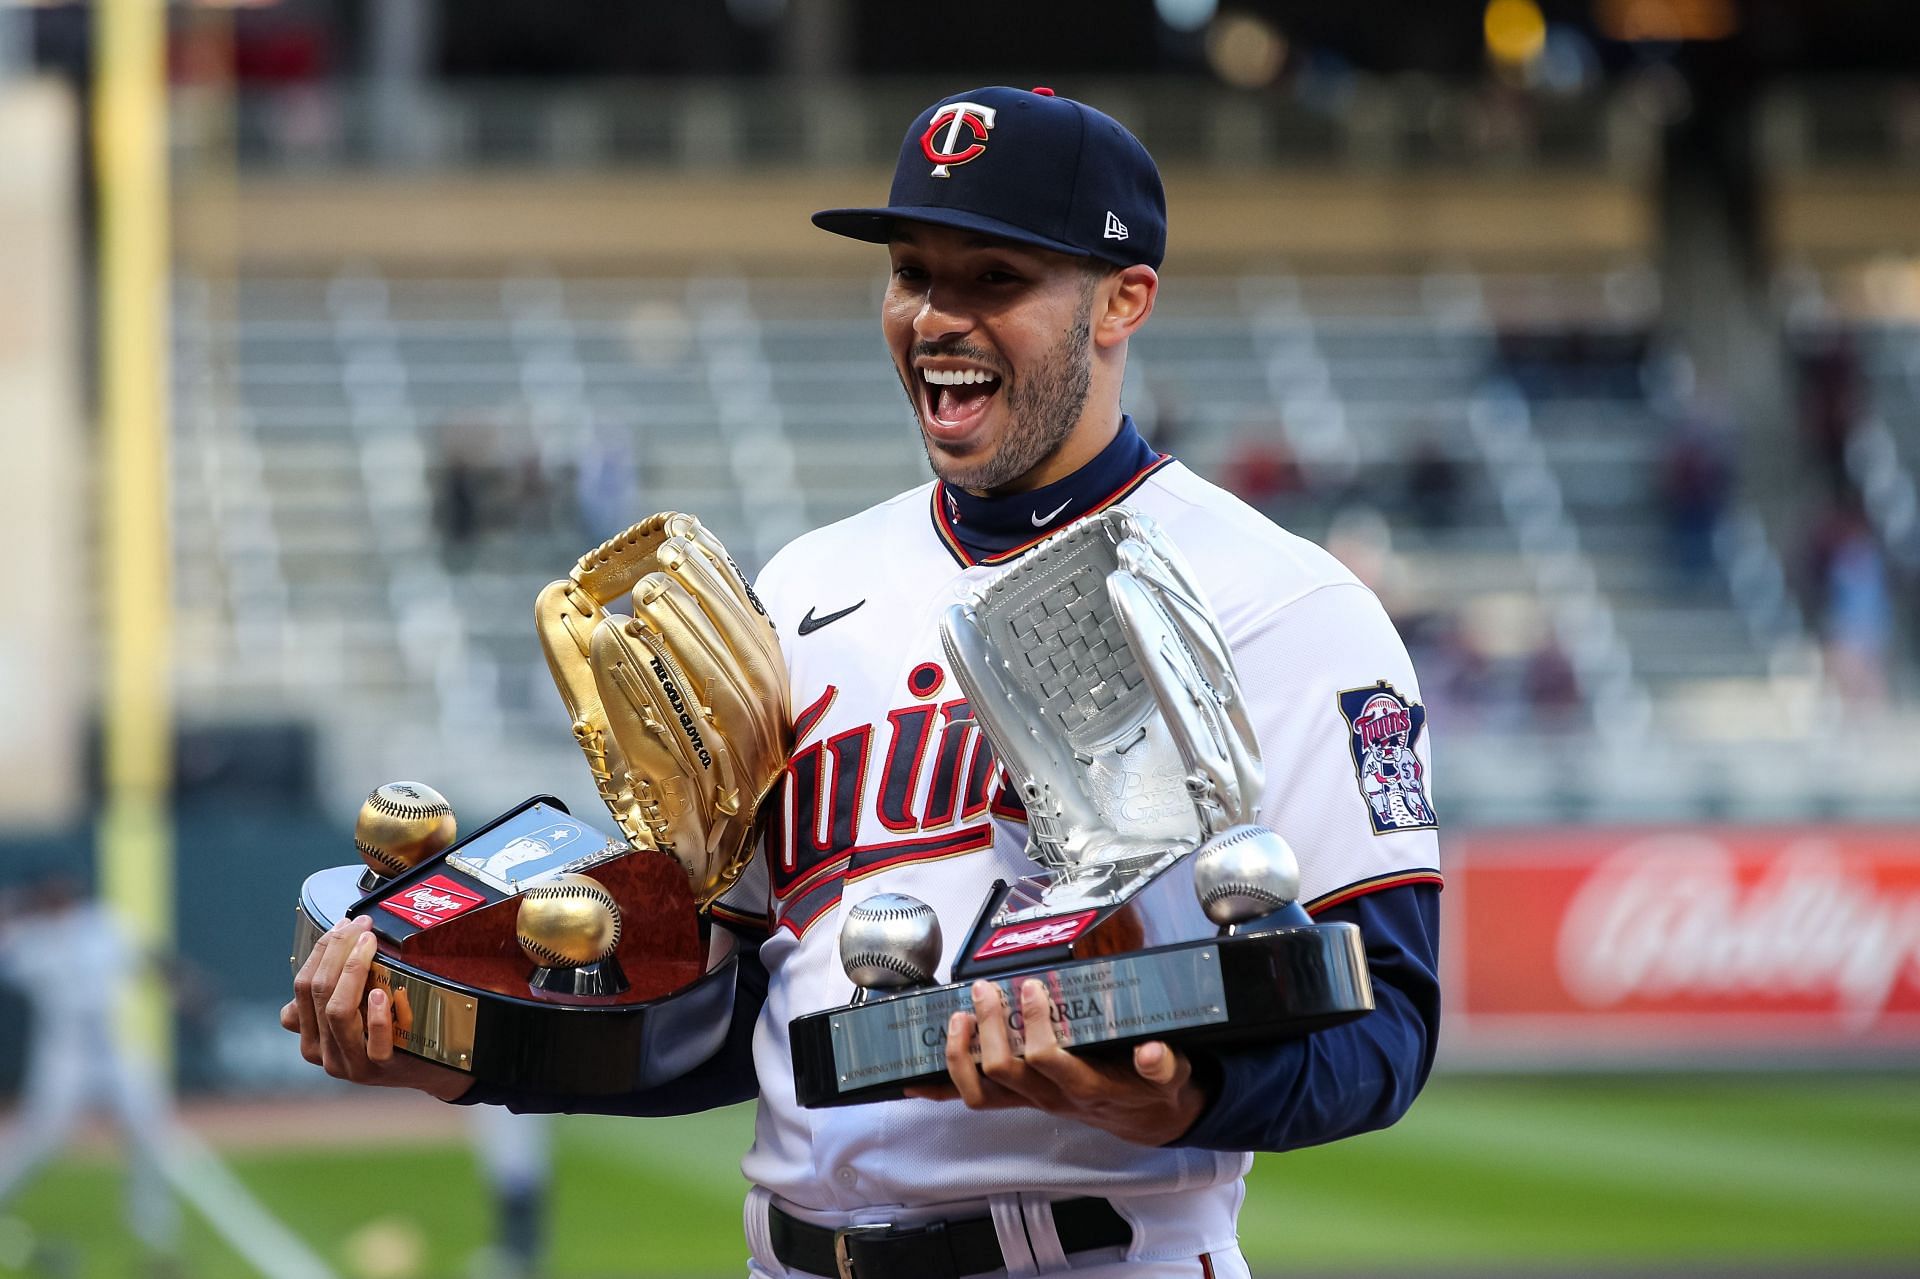 Carlos Correa with his awards from 2021